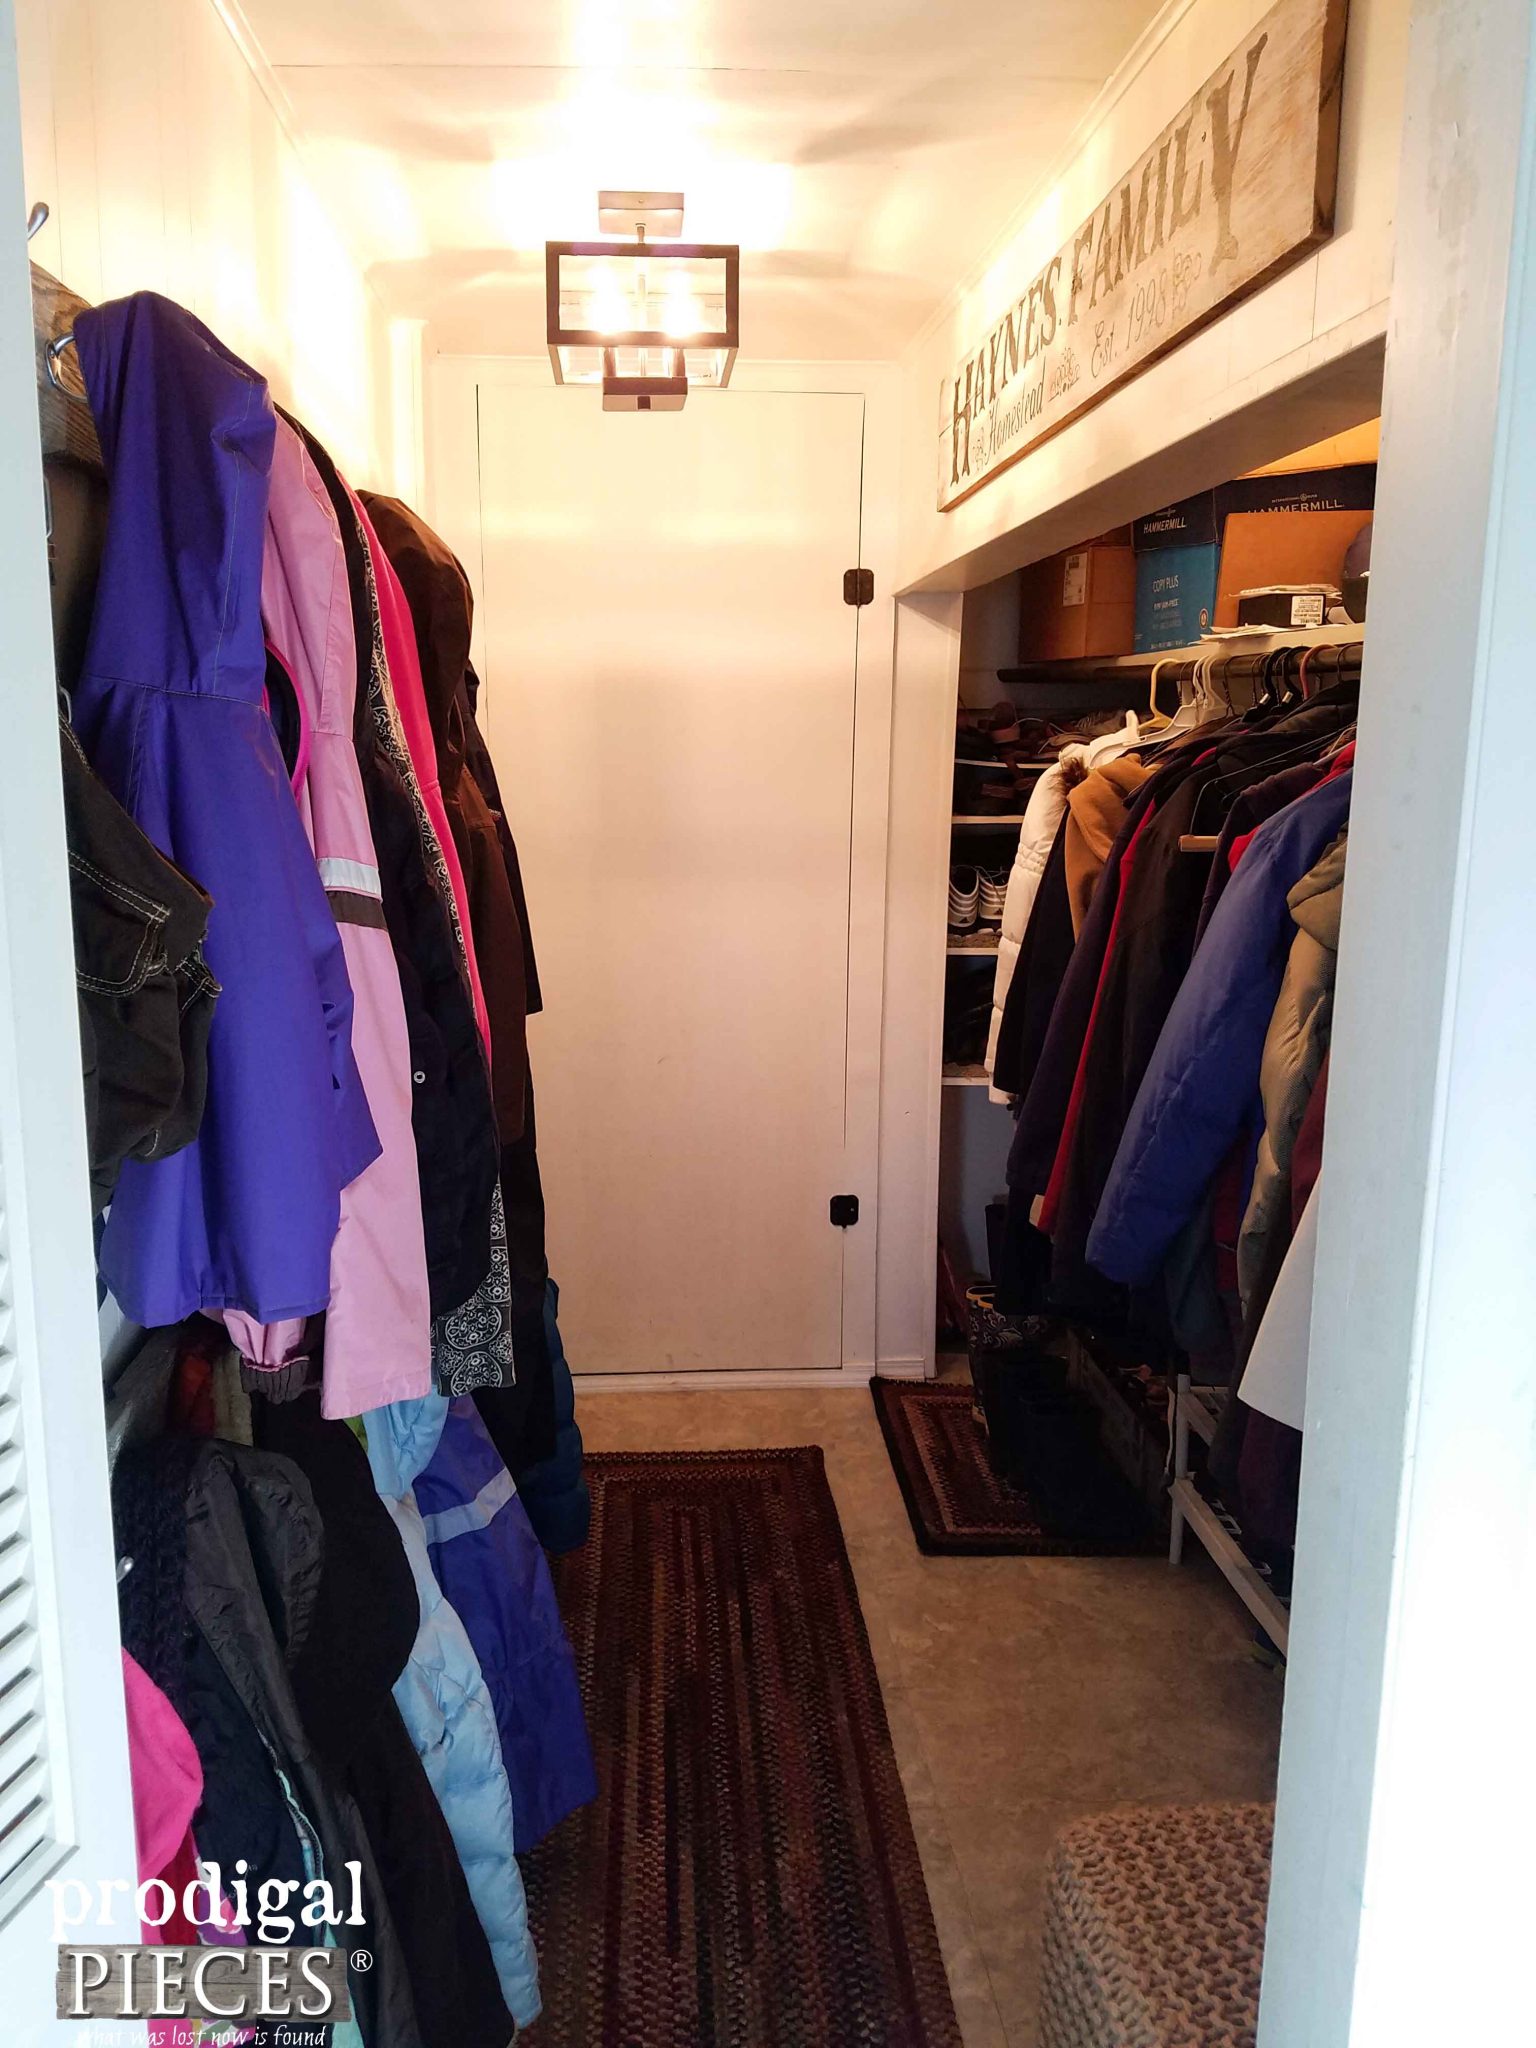 Mudroom Makeover After Budget-Friendly Changes by Prodigal Pieces | prodigalpieces.com